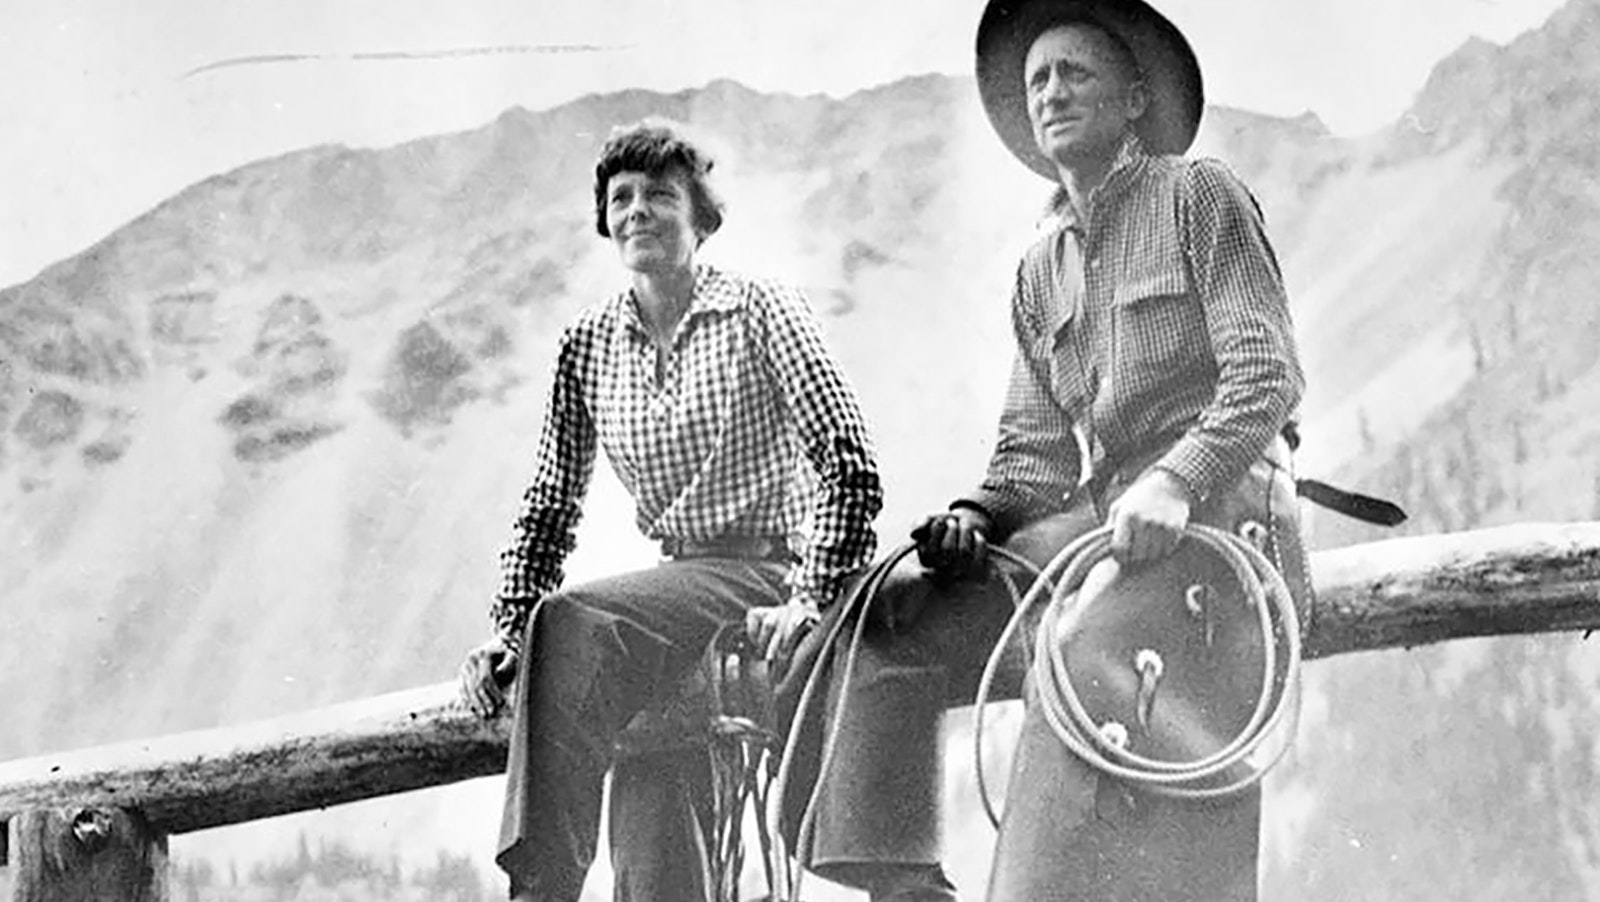 Amelia Earhart and Carl Dunrud sit on the top rail of a fence at Double D Ranch on the upper Wood River in Wyoming with the Absaroka Mountains in the background.